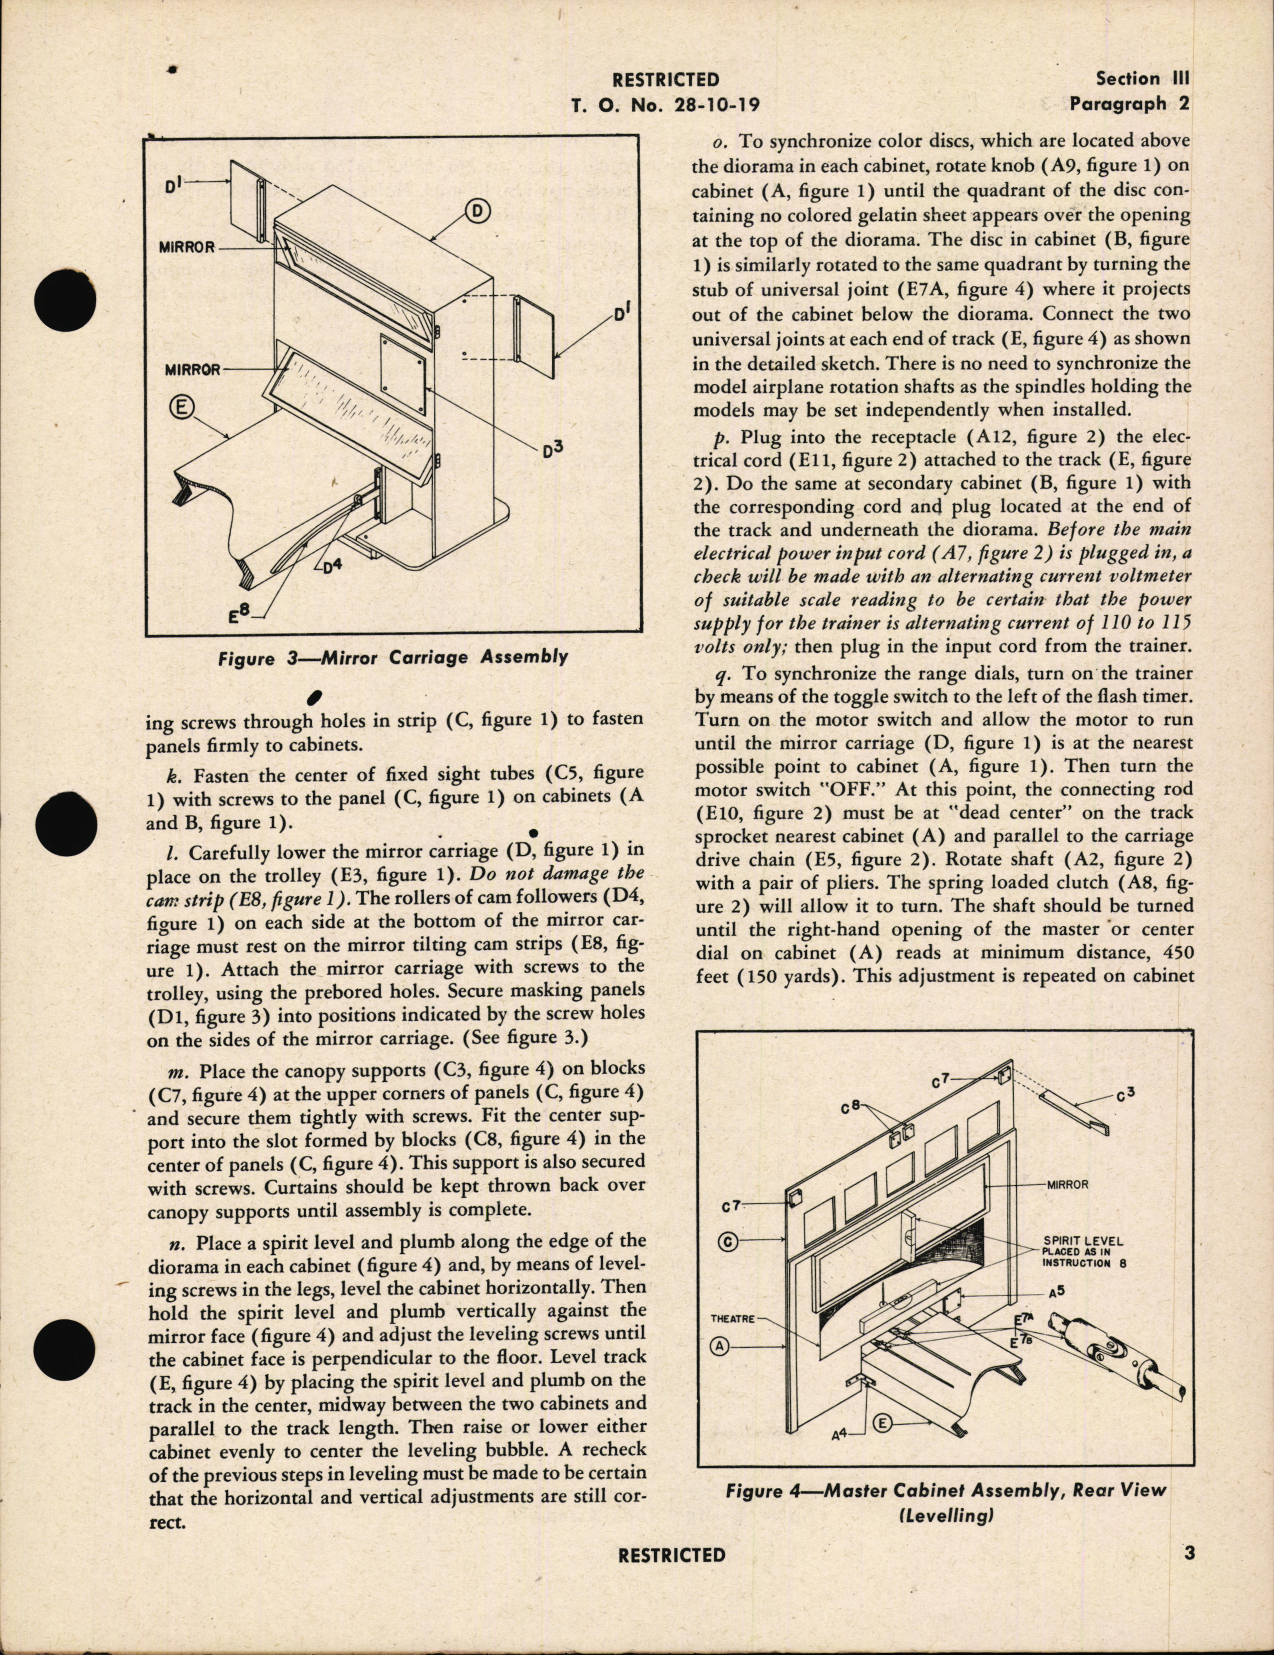 Sample page 7 from AirCorps Library document: Handbook of Instructions with Parts Catalog for Mirror Range Estimation Trainers